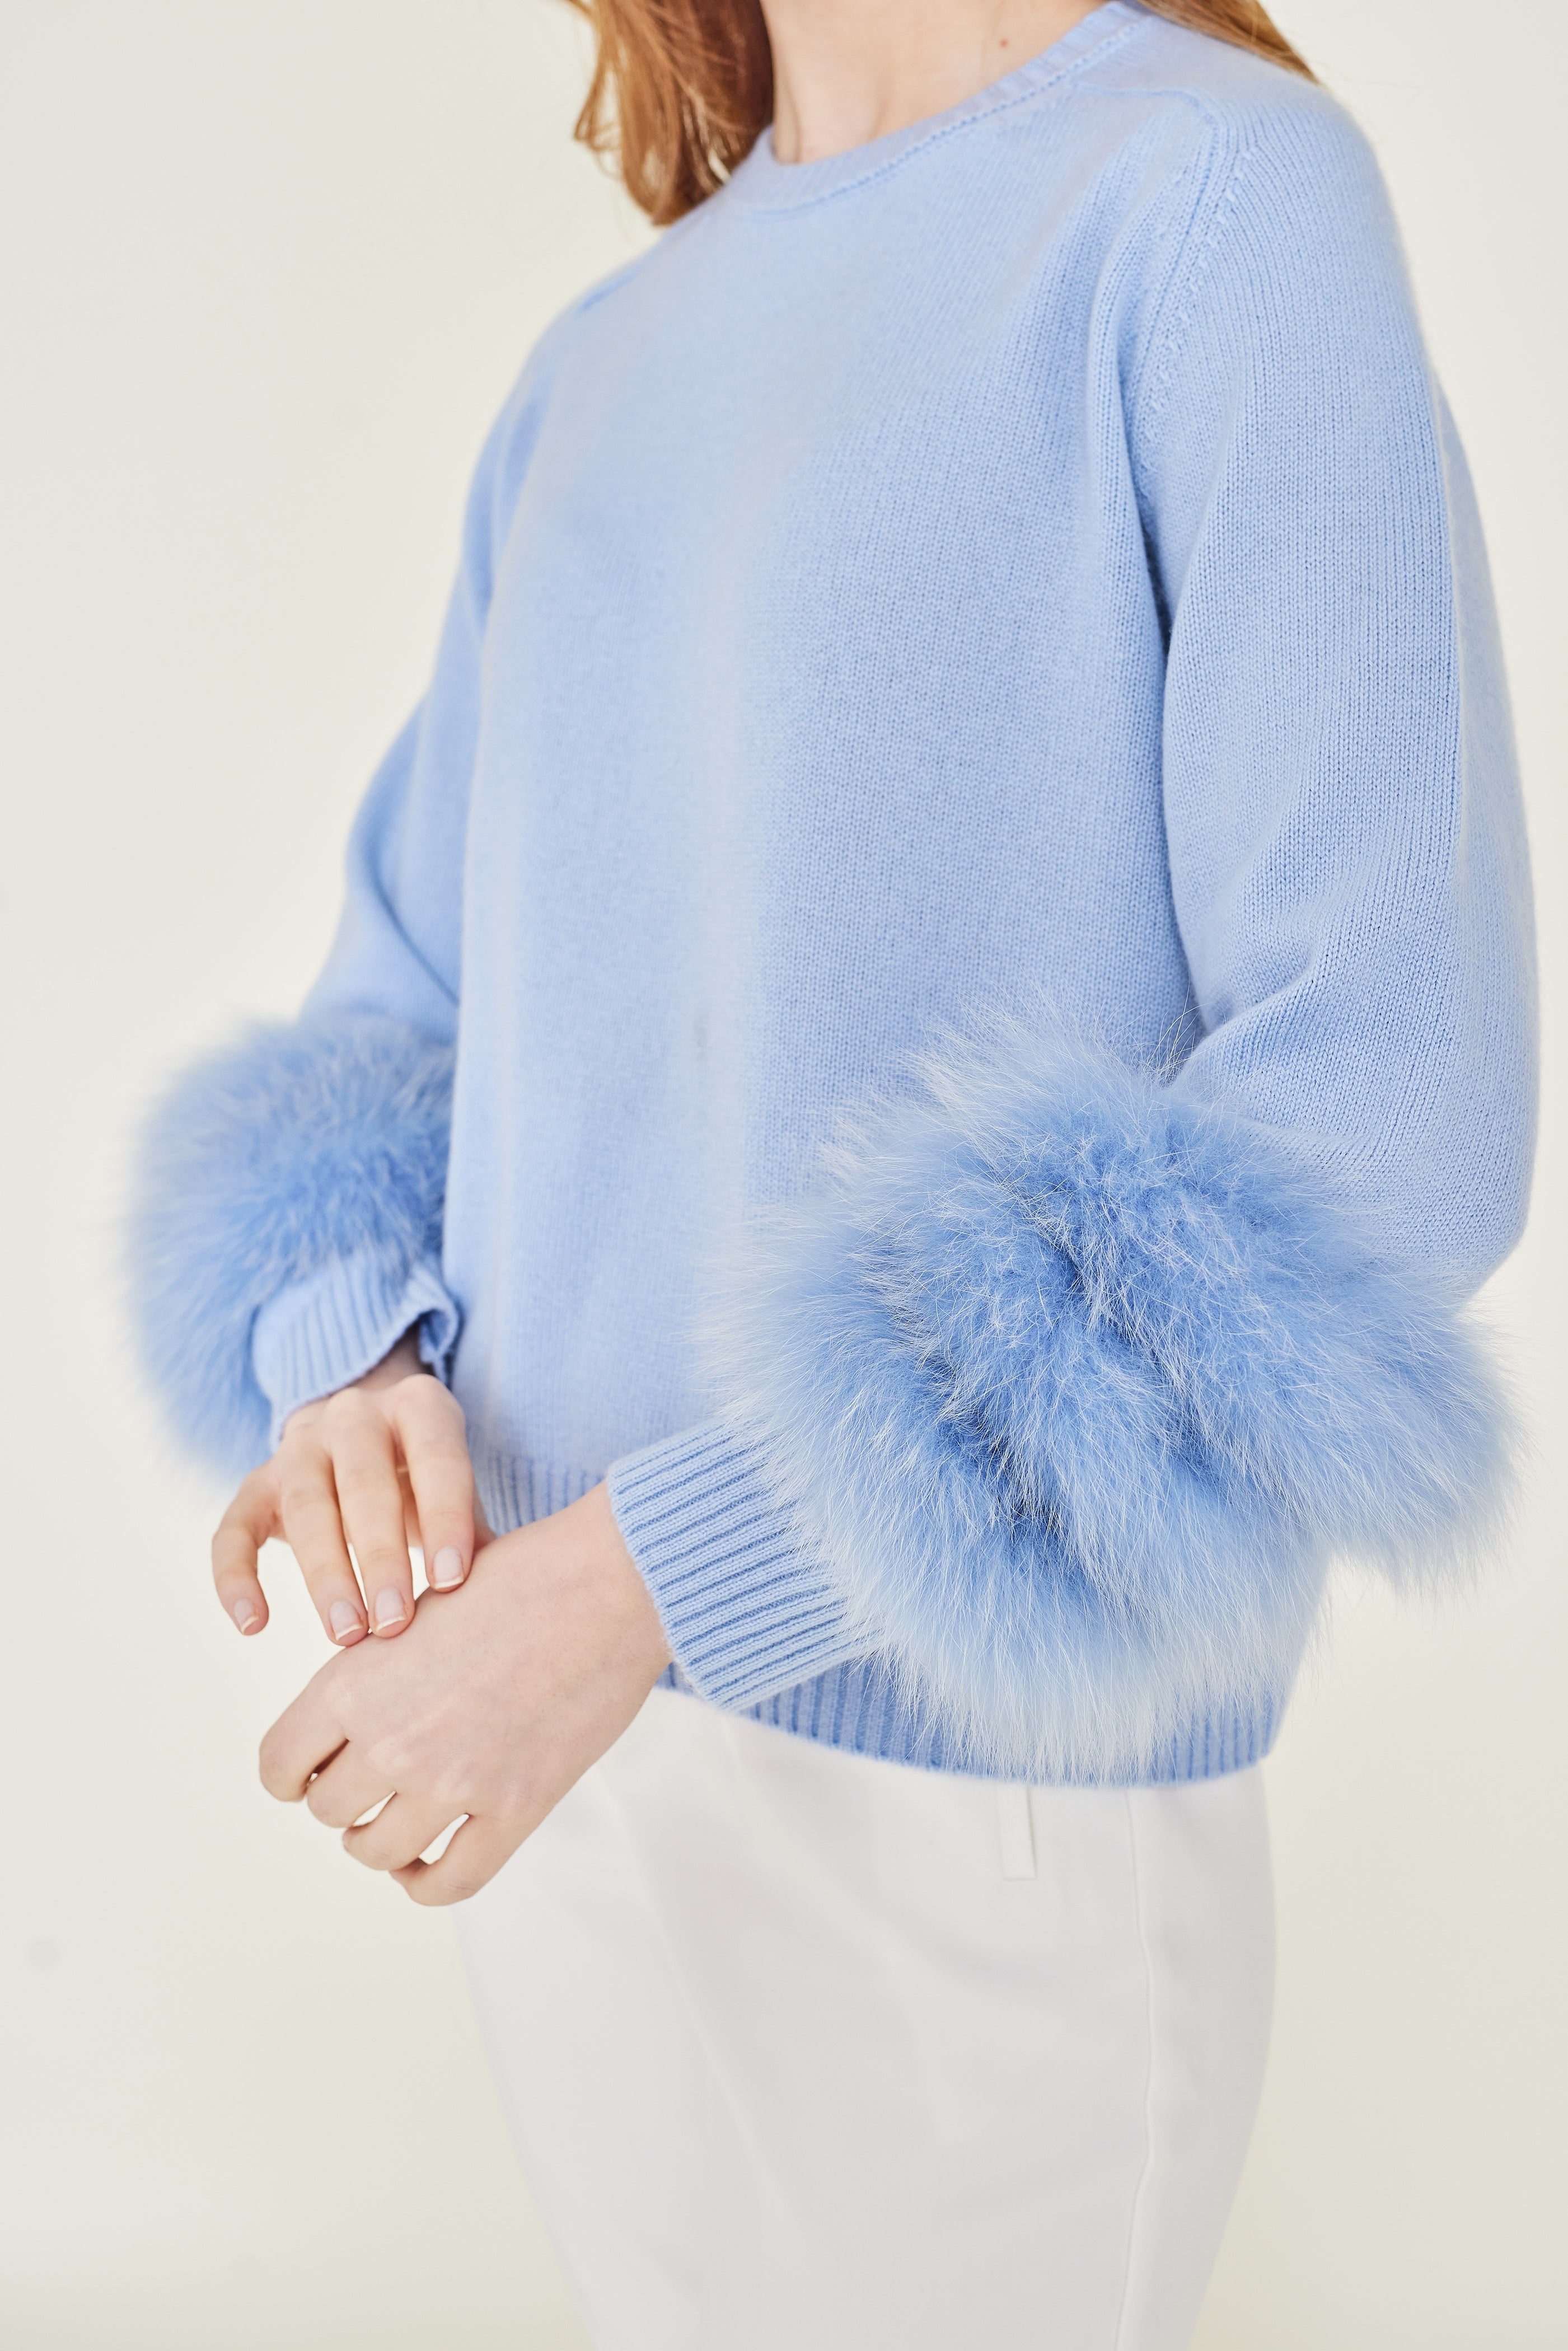 Matignon Cashmere Sweater With Fur - Baby Blue